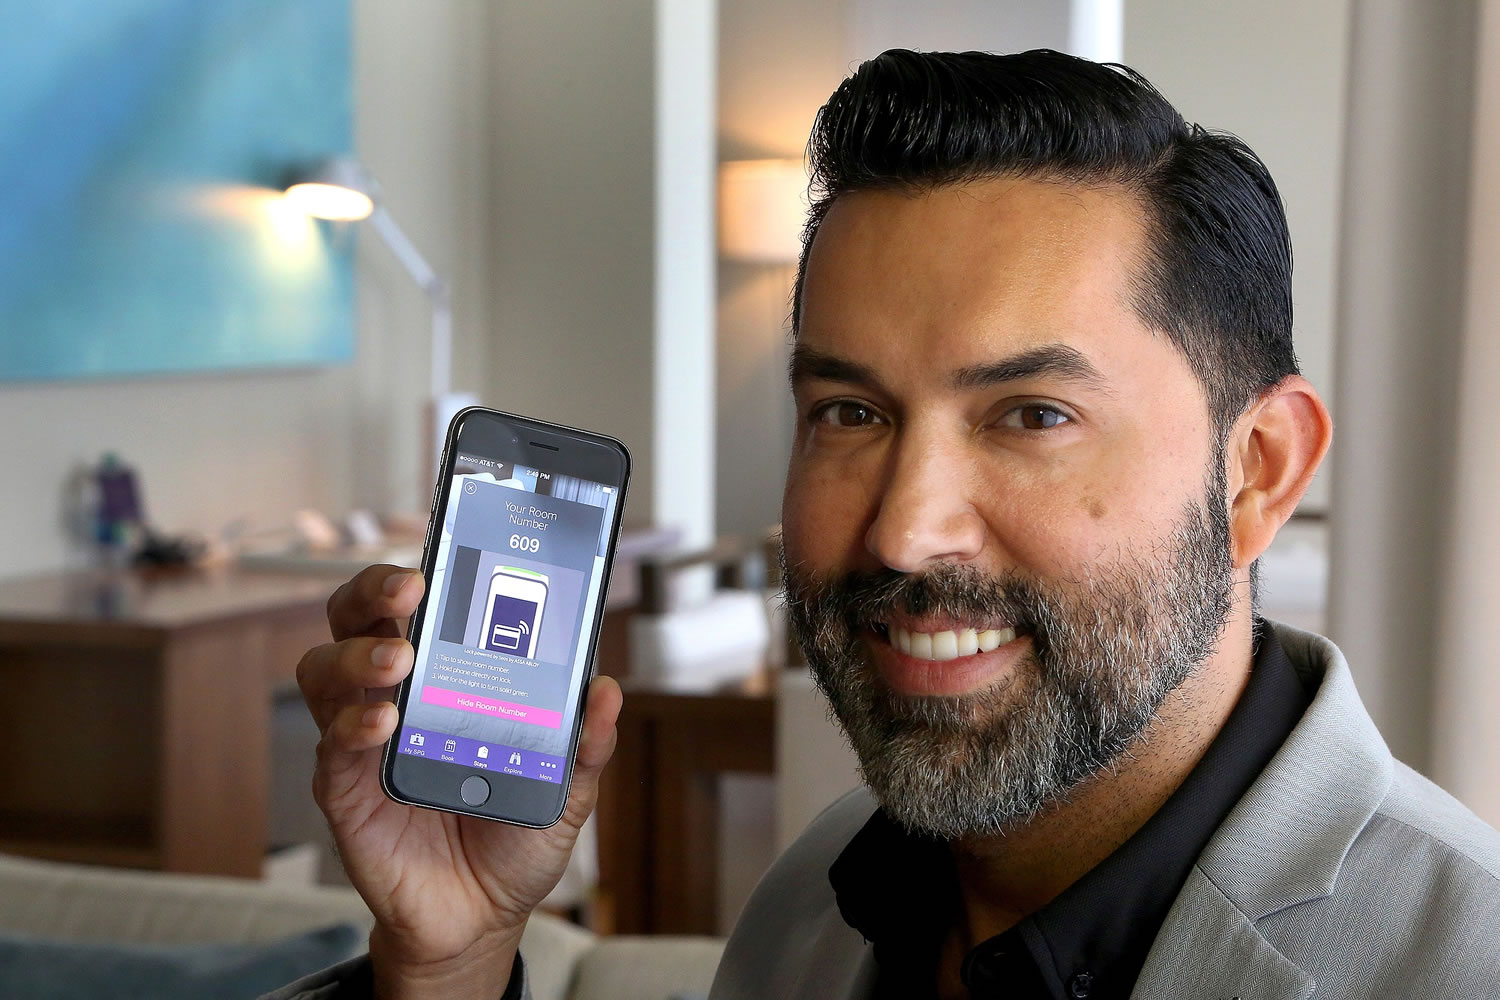 Alexis Espejo, marketing manager at the W Fort Lauderdale Hotel, shows the new keyless-entry app at the hotel.